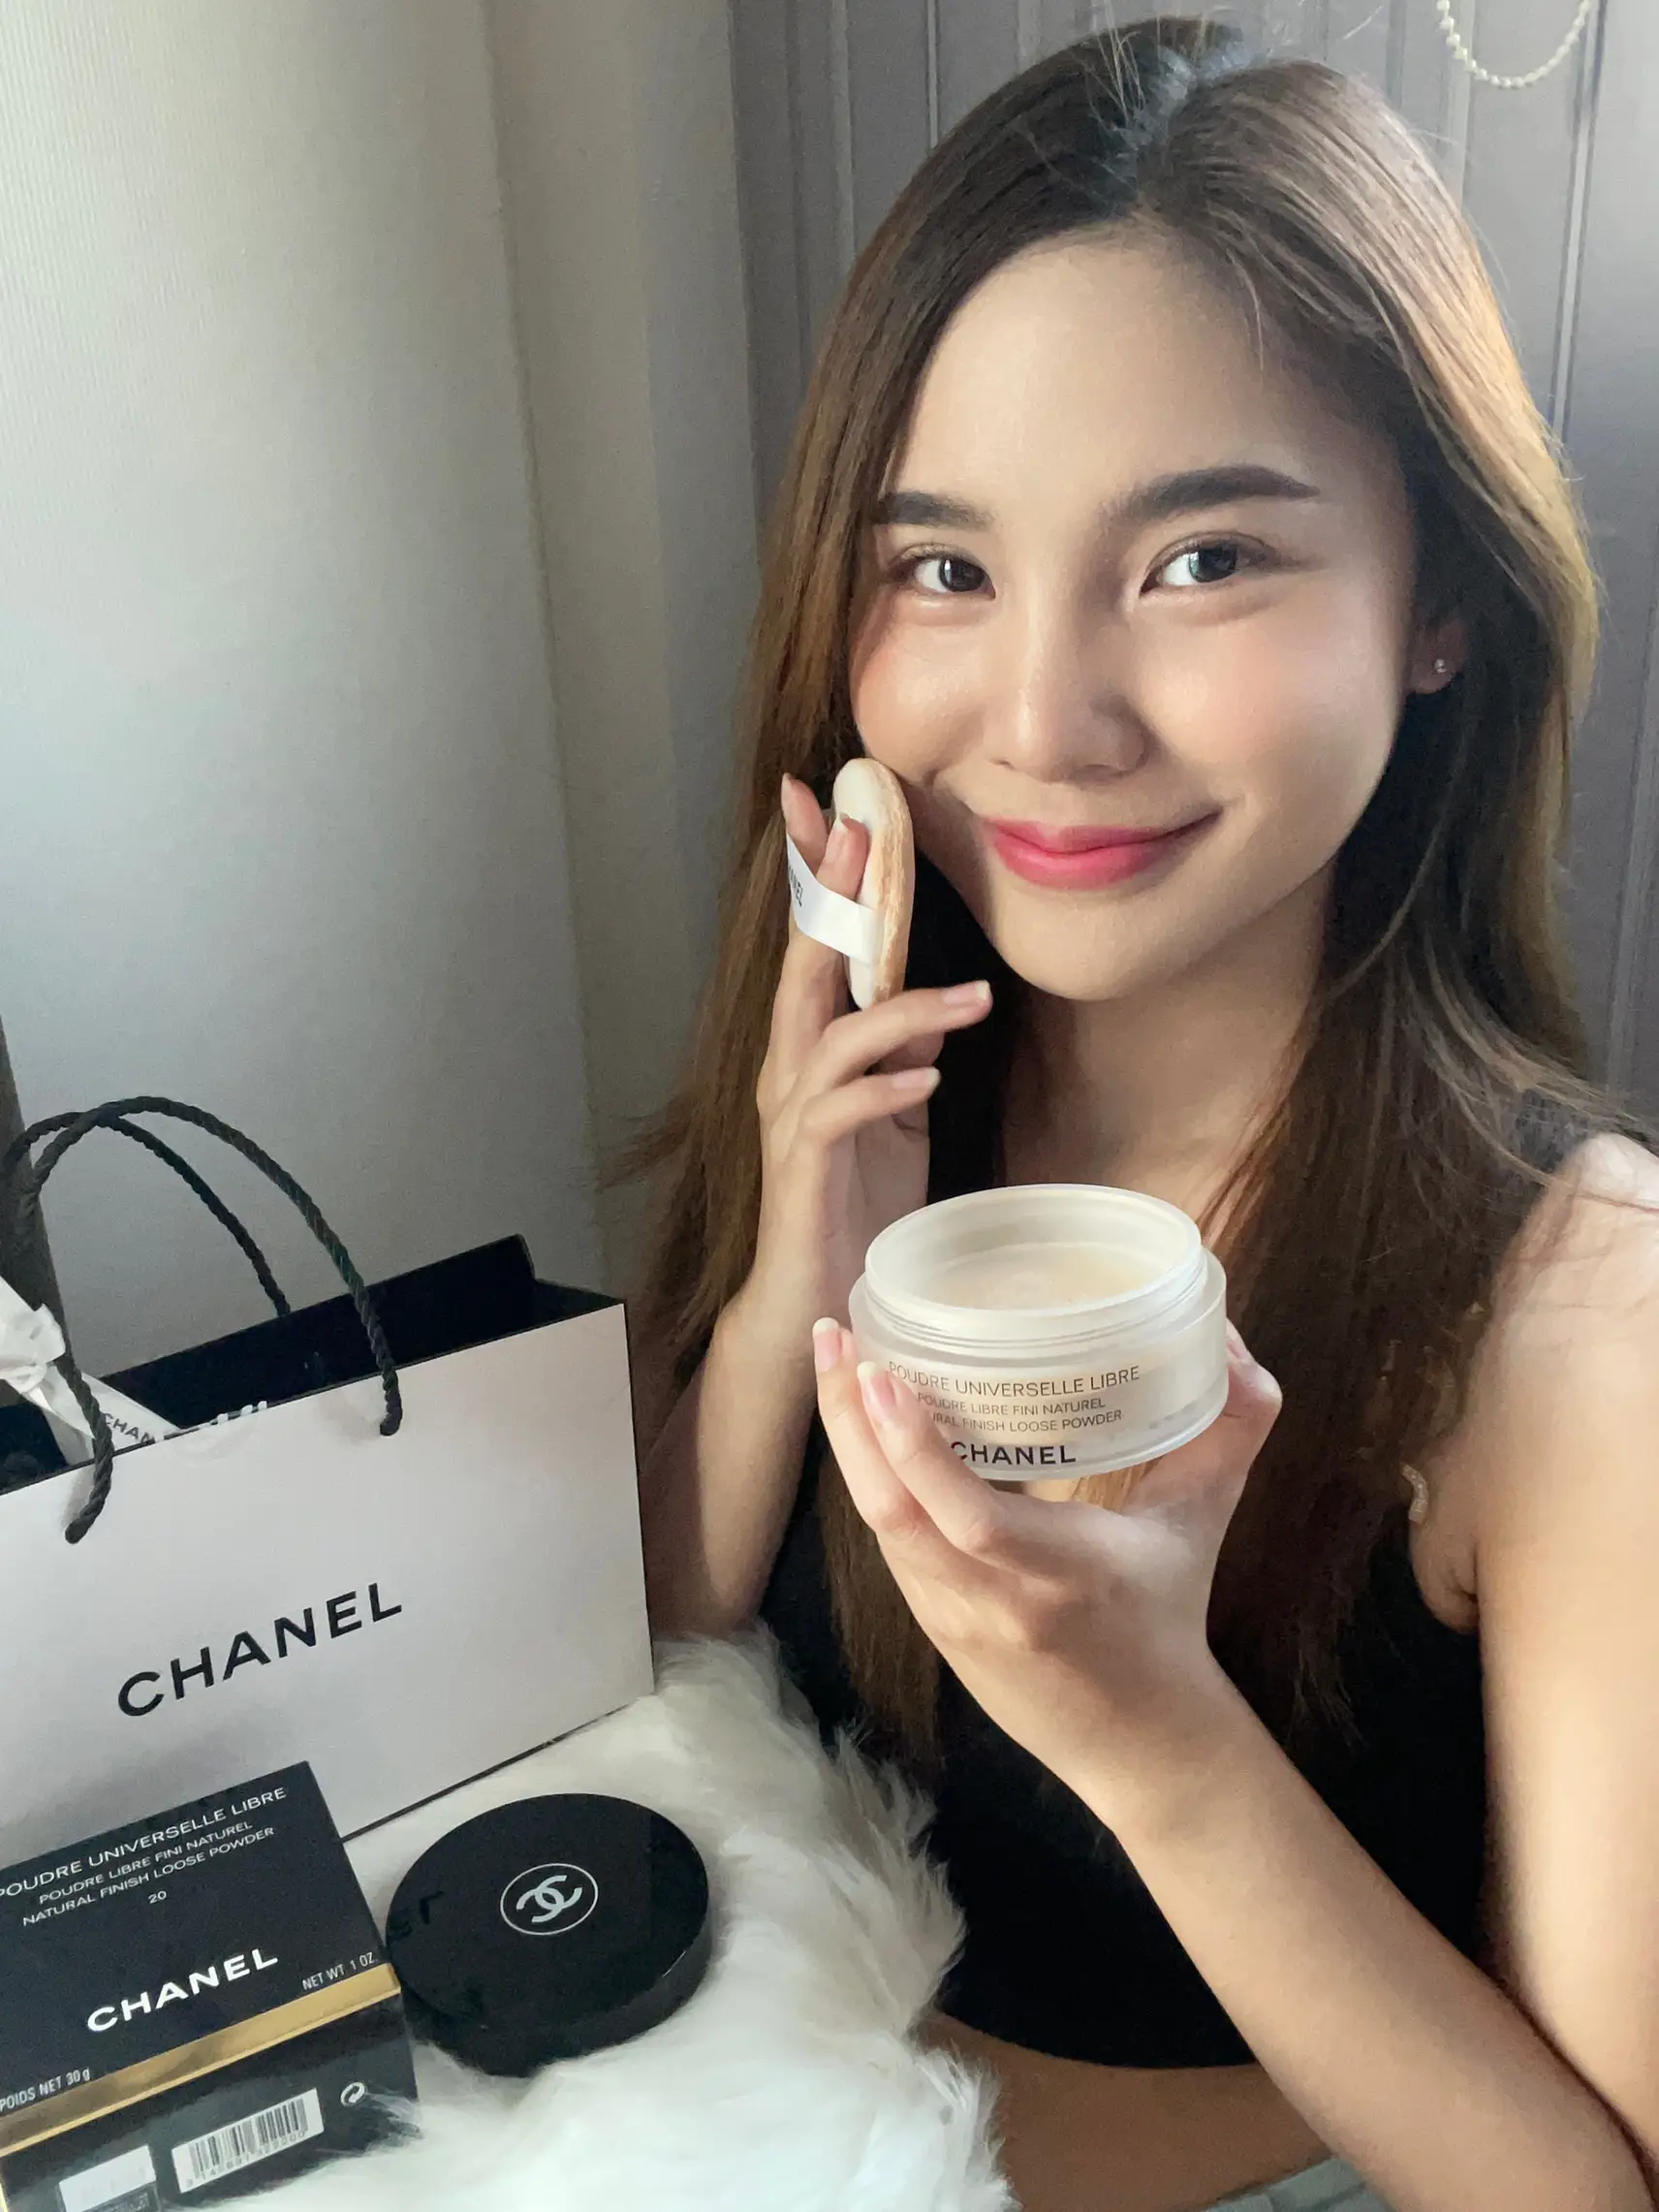 CHANEL Free Universal, Gallery posted by Maypnk_